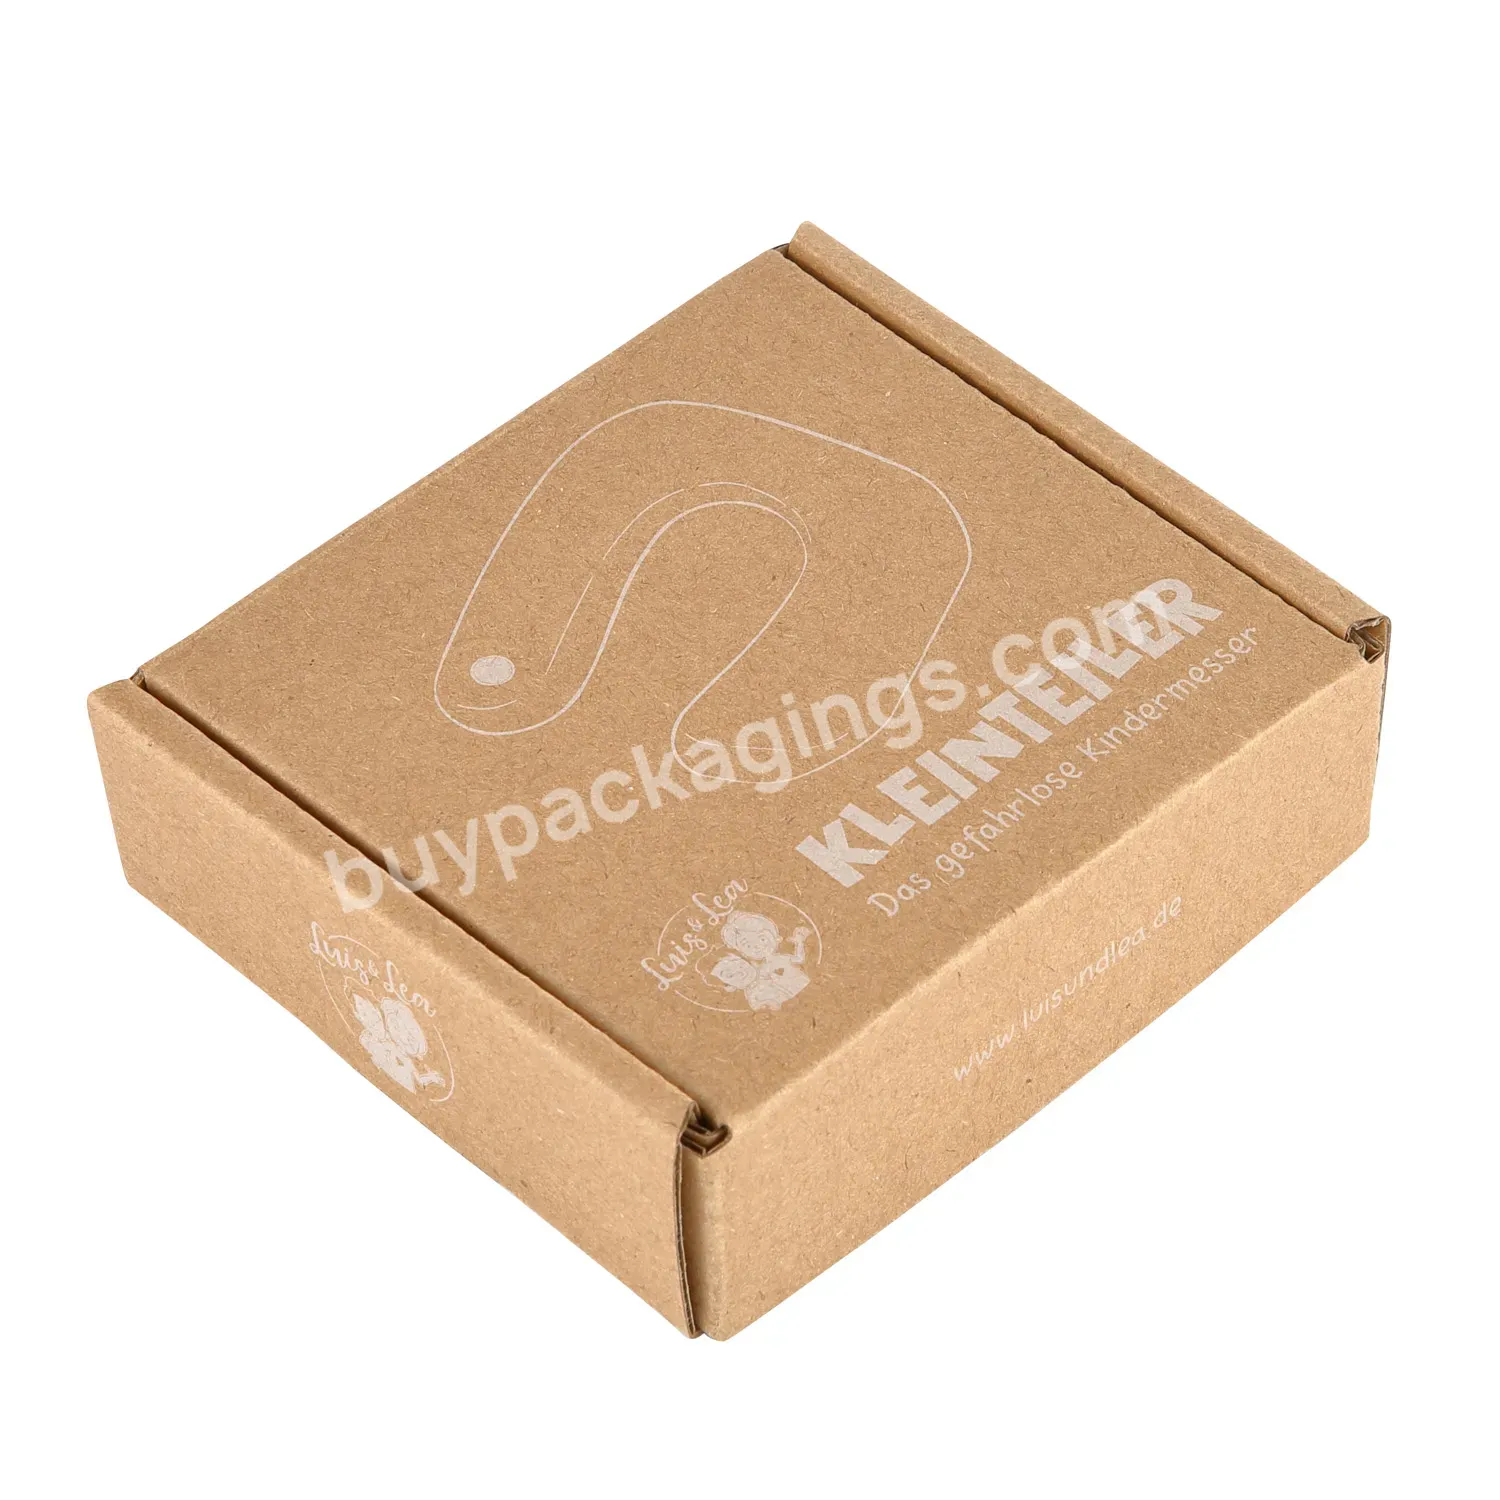 Hot Sale Luxury Shipping Mailer Paper Box Self-adhesive Sealing Tear-off Strip Paper Box